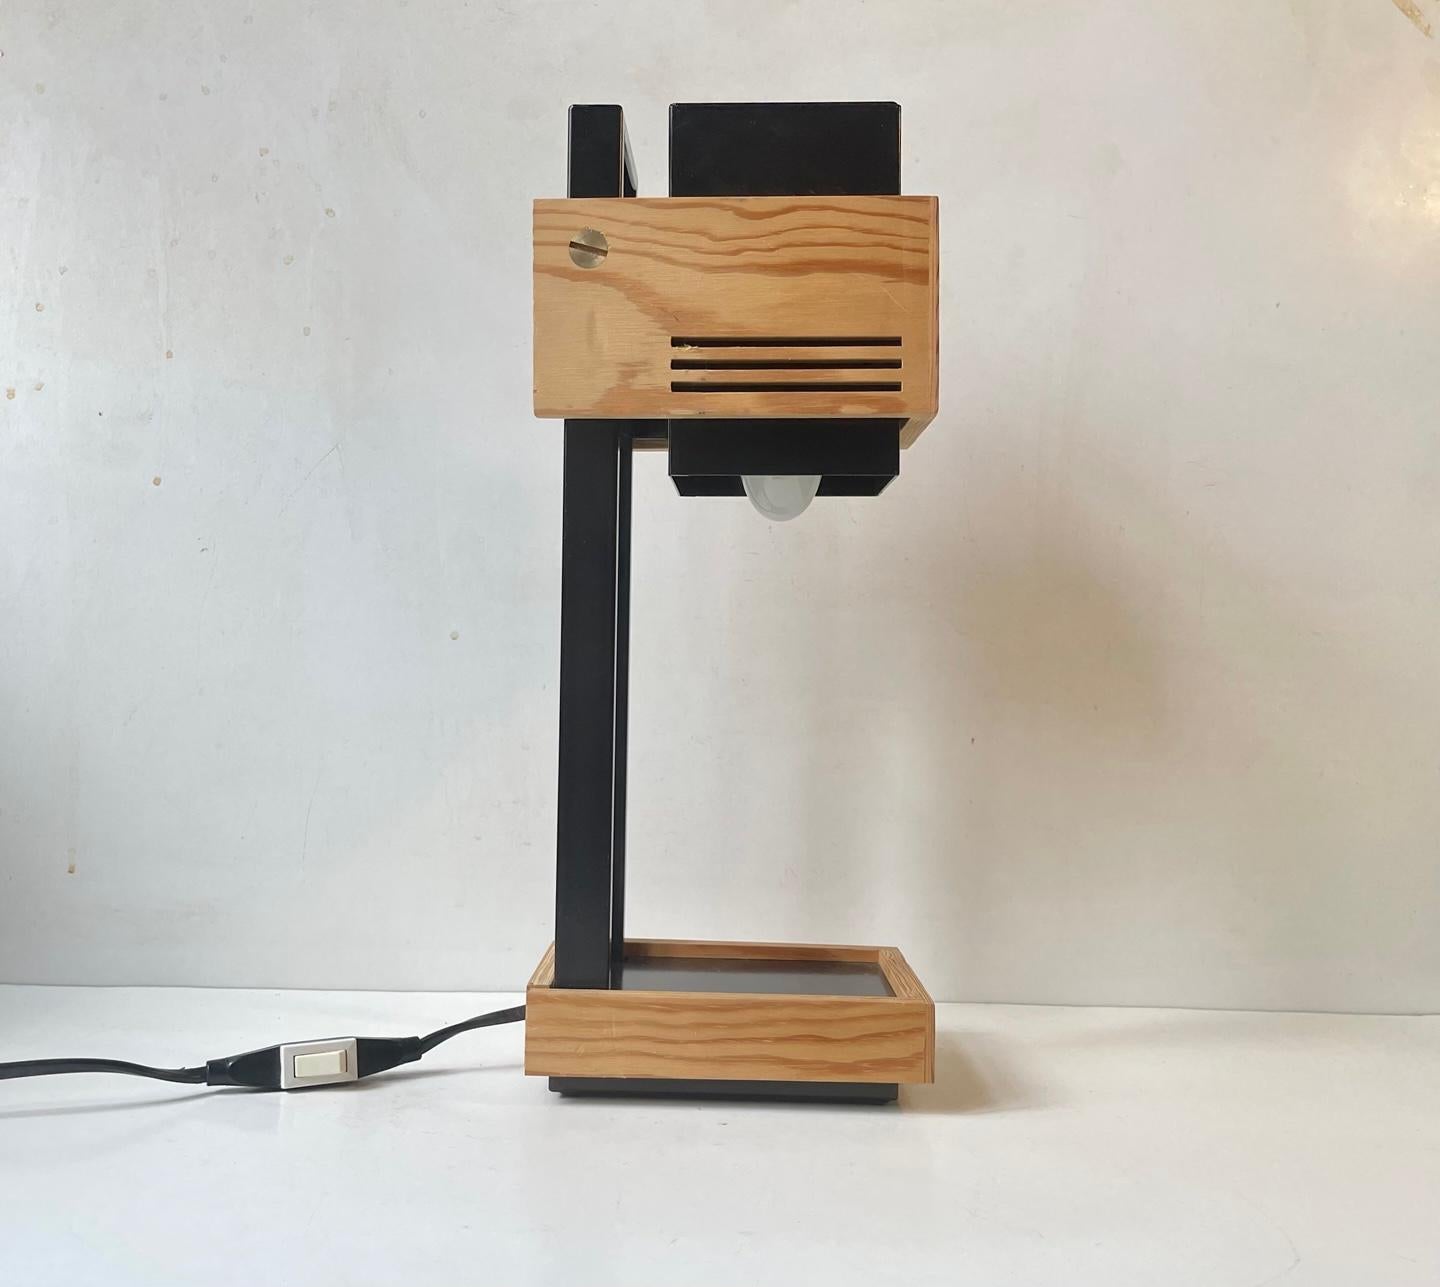 A very rare table light in Black lacquered steel and plywood. Within the realm of constructivist/cubist designs. Design number 9002 designed by Claus Bolby and manufactured by Cebo Industri in Denmark during the 1970s. It features on/off switch to